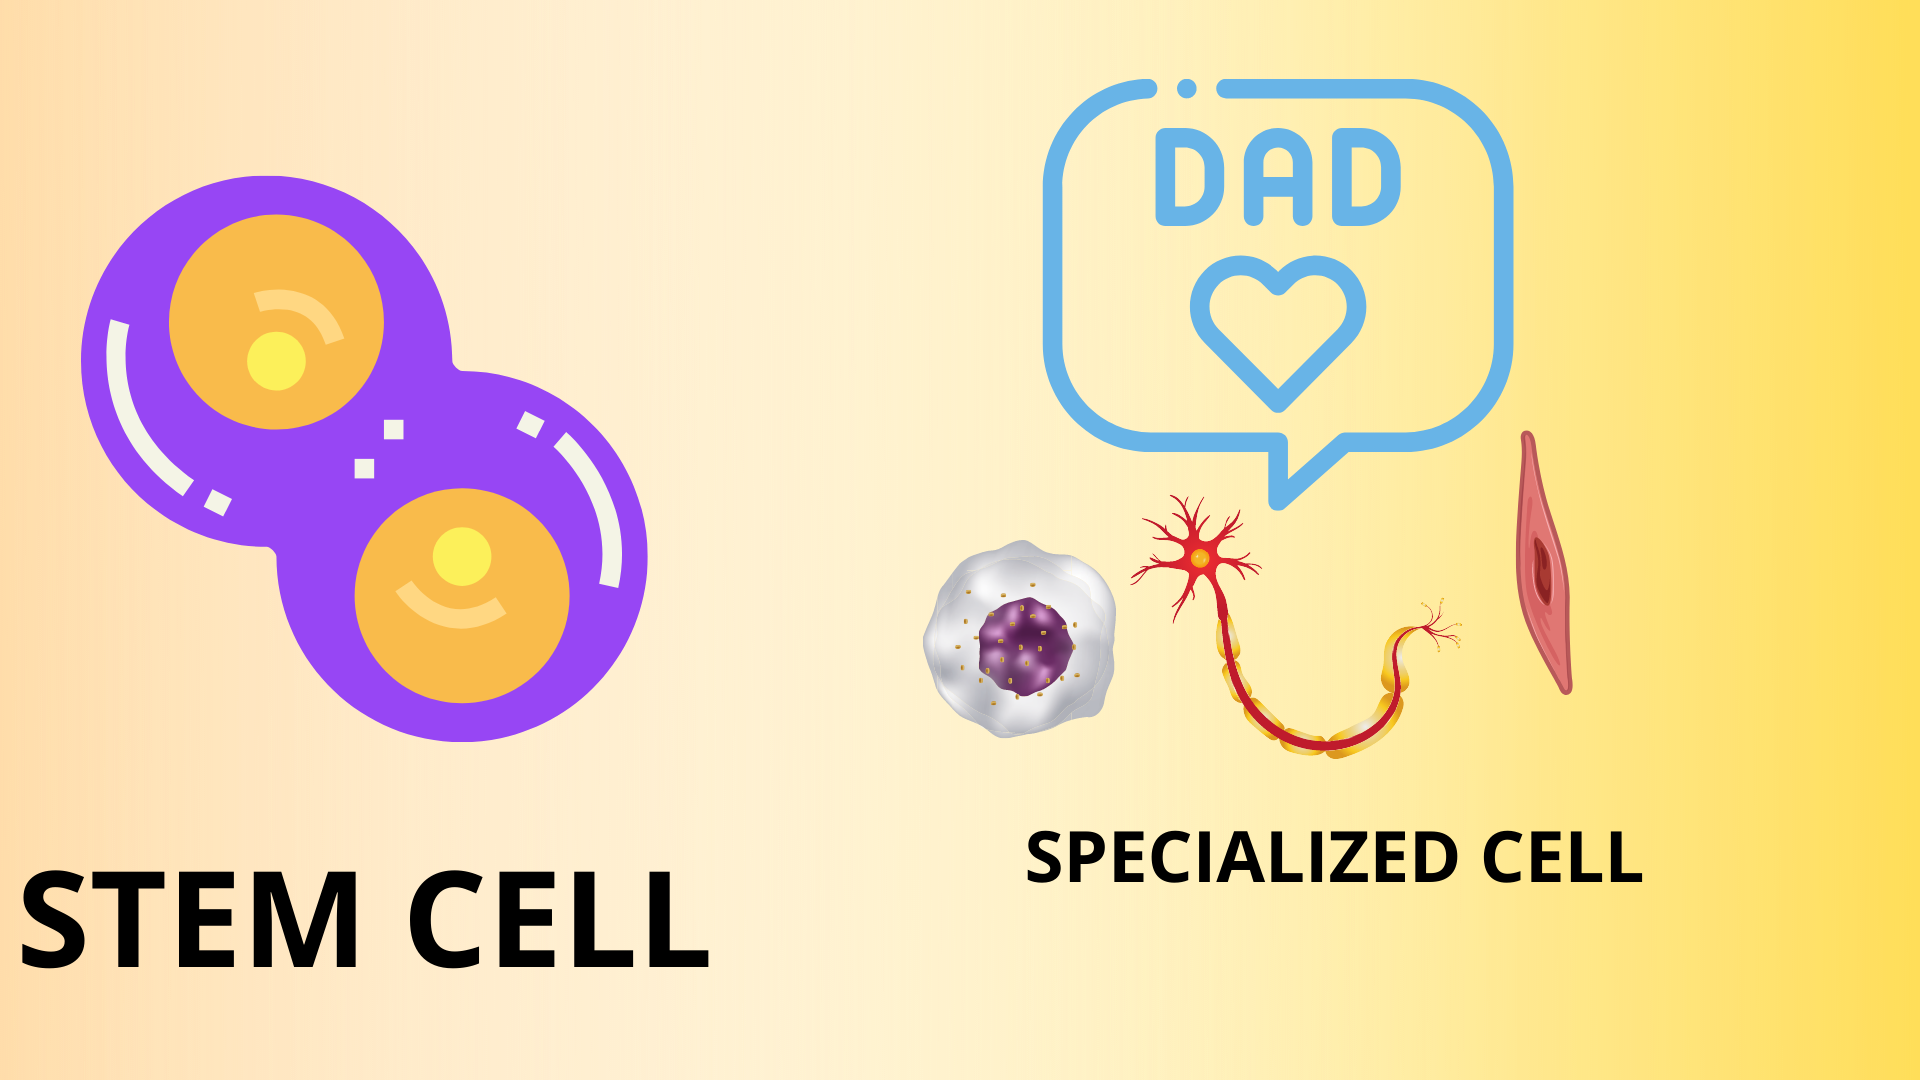 Father of all Cells (STEM CELL):